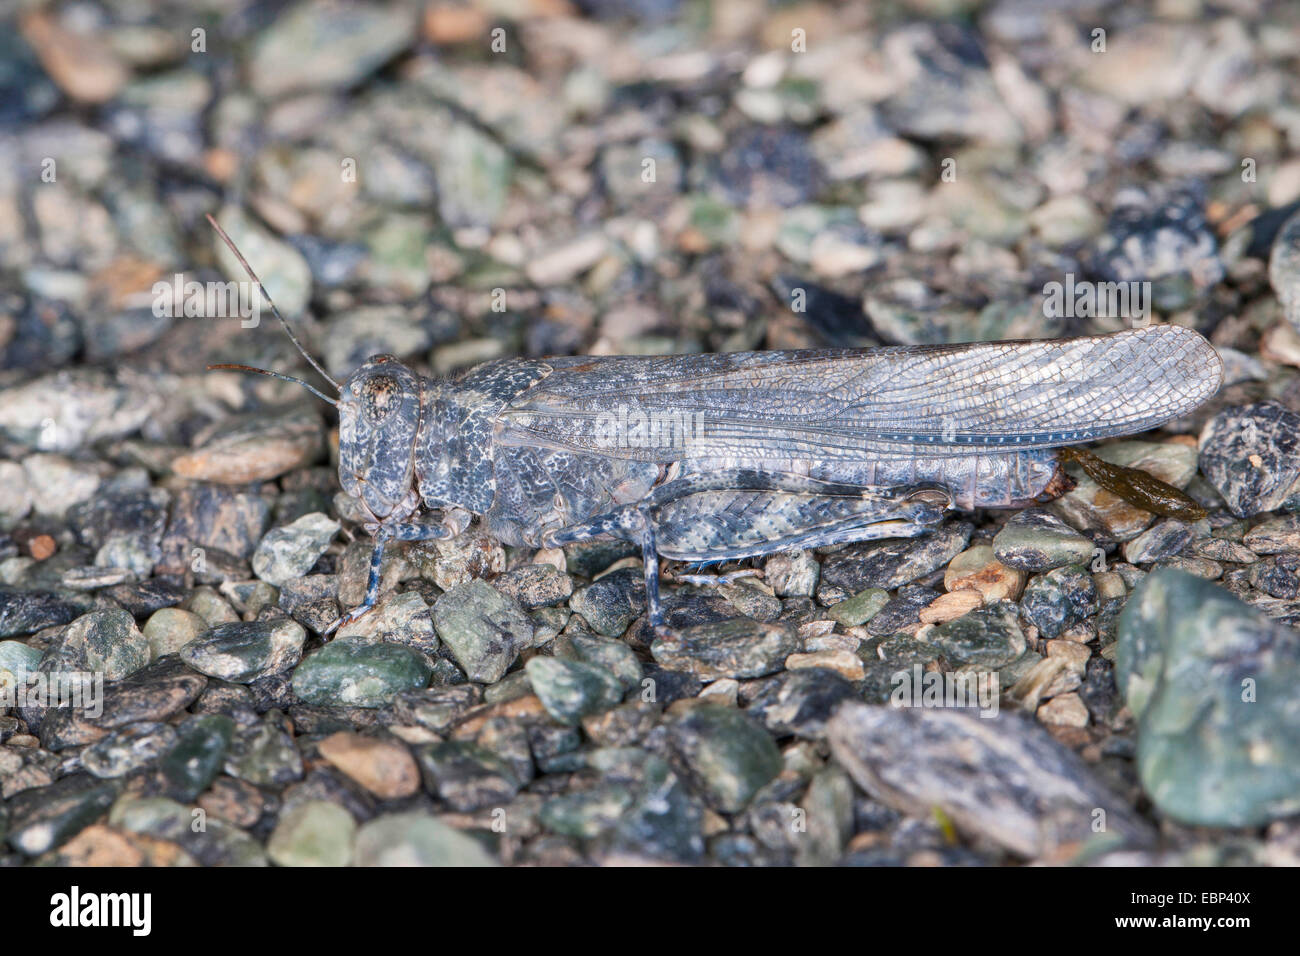 Blue-winged Grasshopper (Sphingonotus spec.), perfect camouflage on the ground Stock Photo